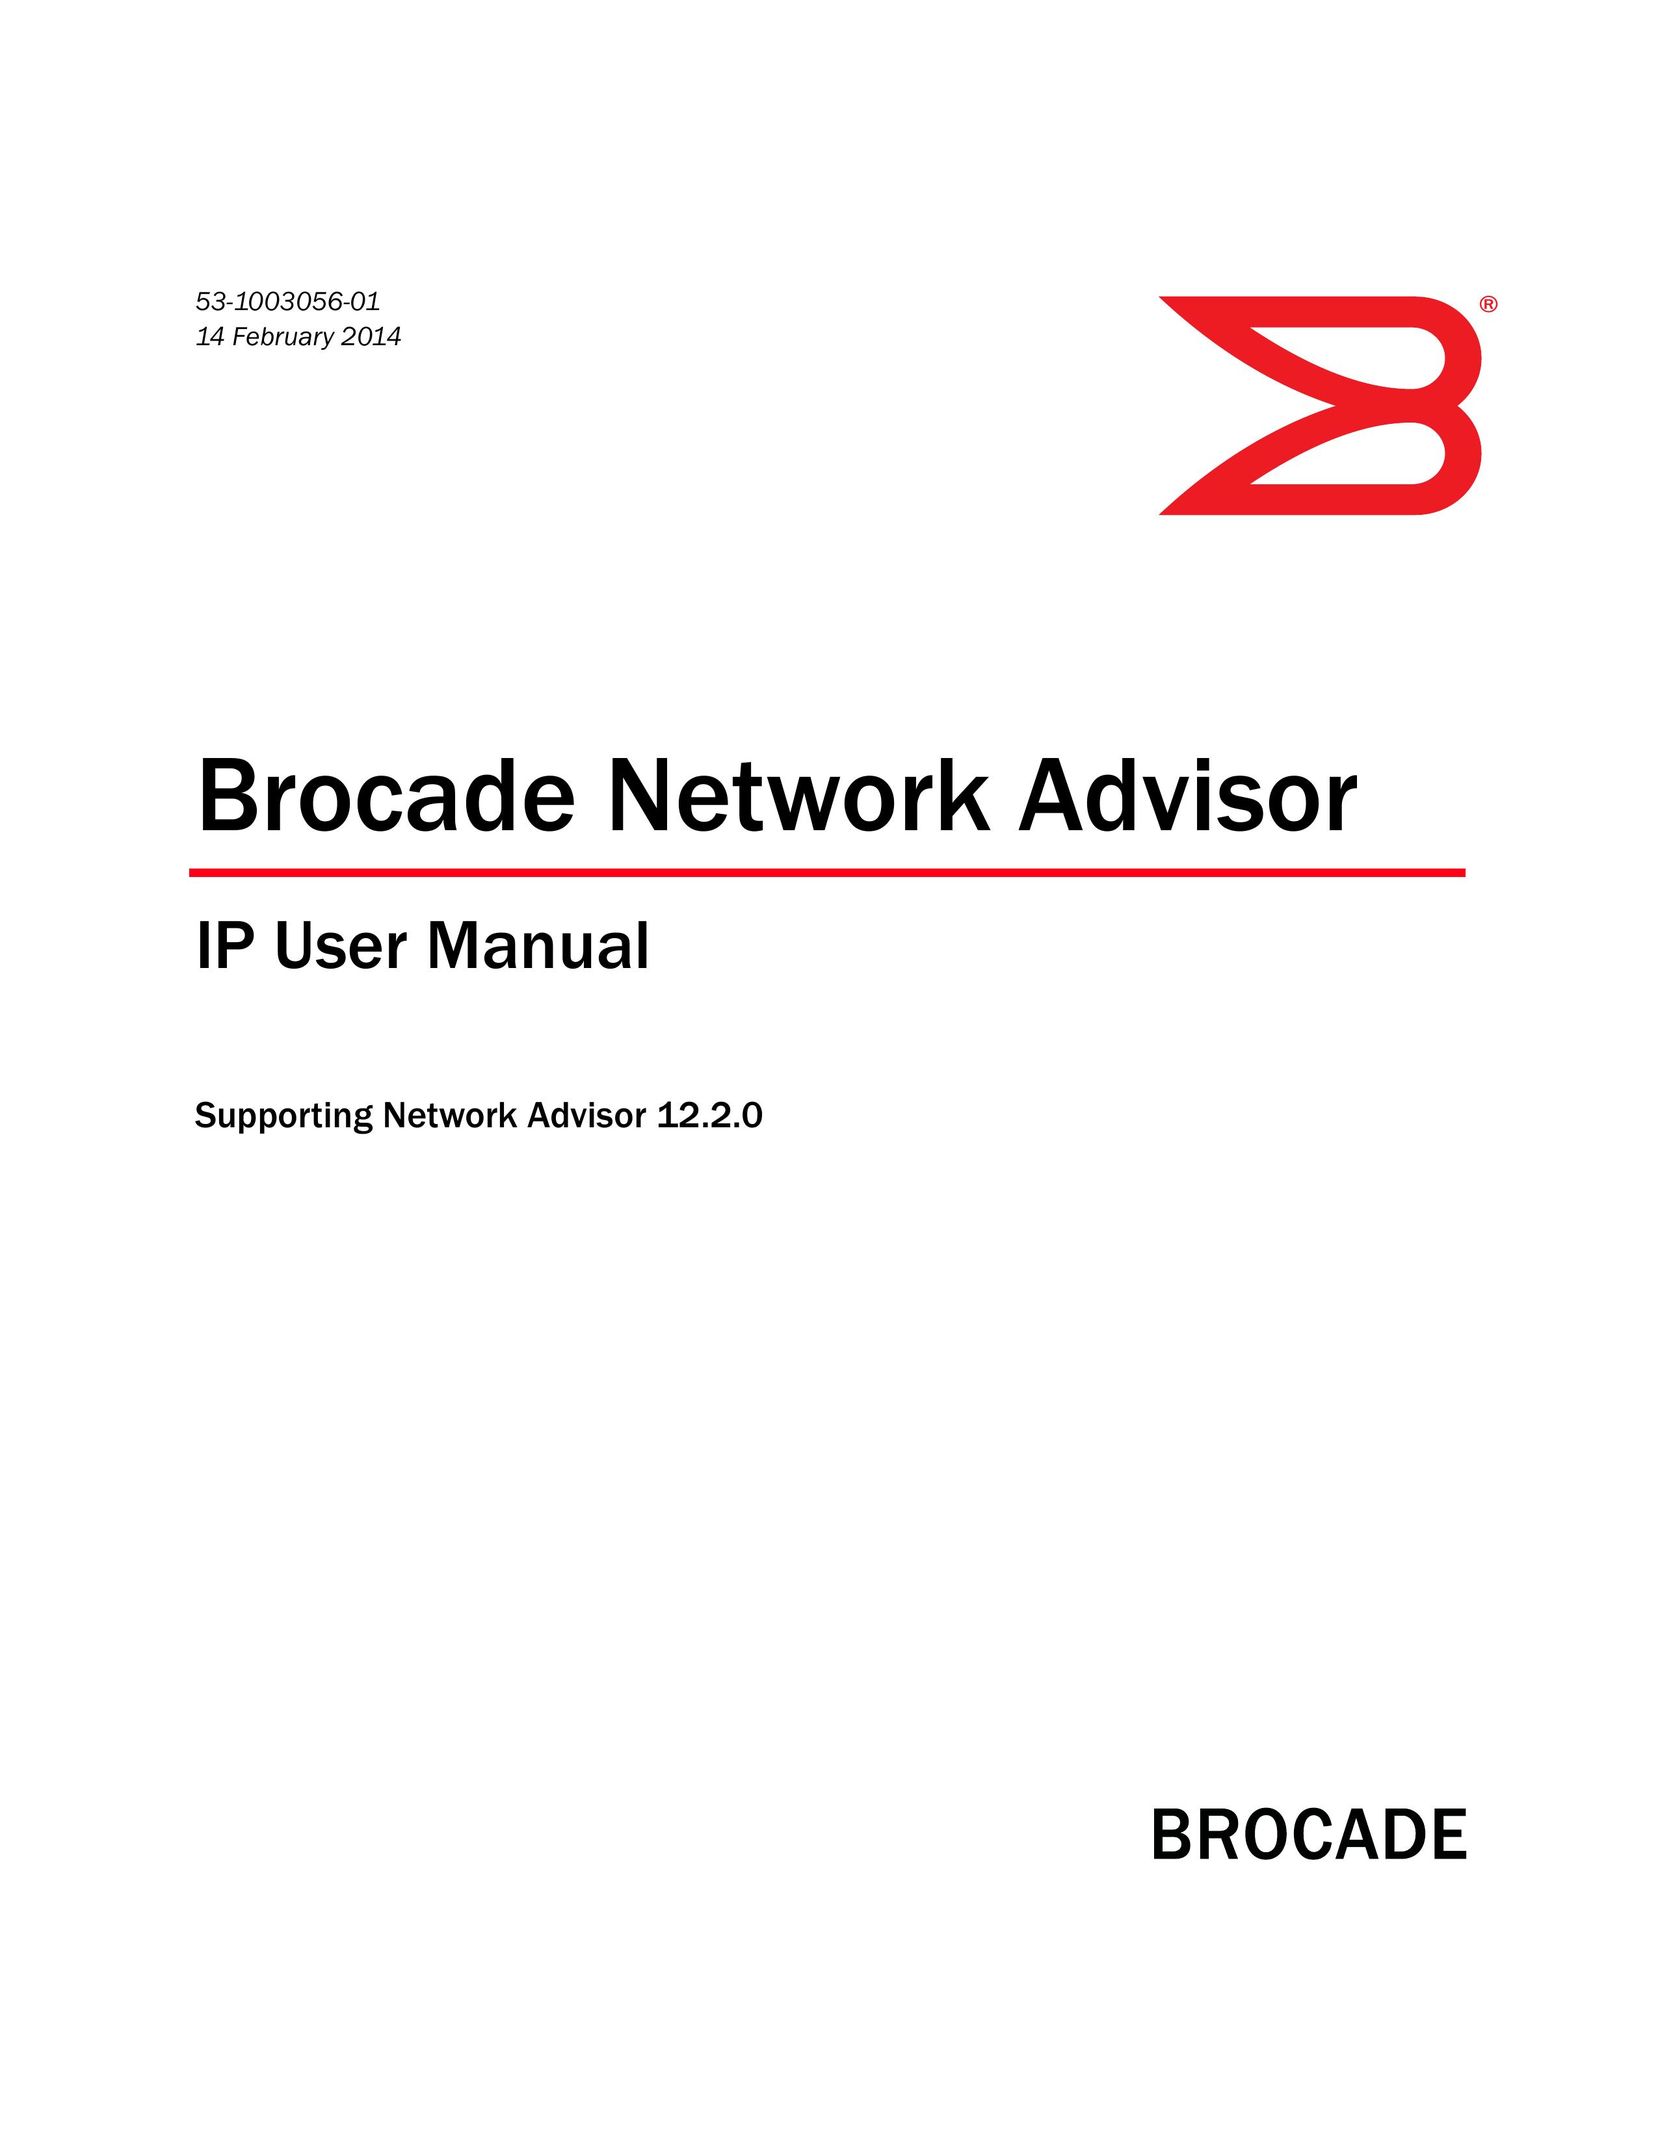 Brocade Communications Systems IP250 Network Hardware User Manual